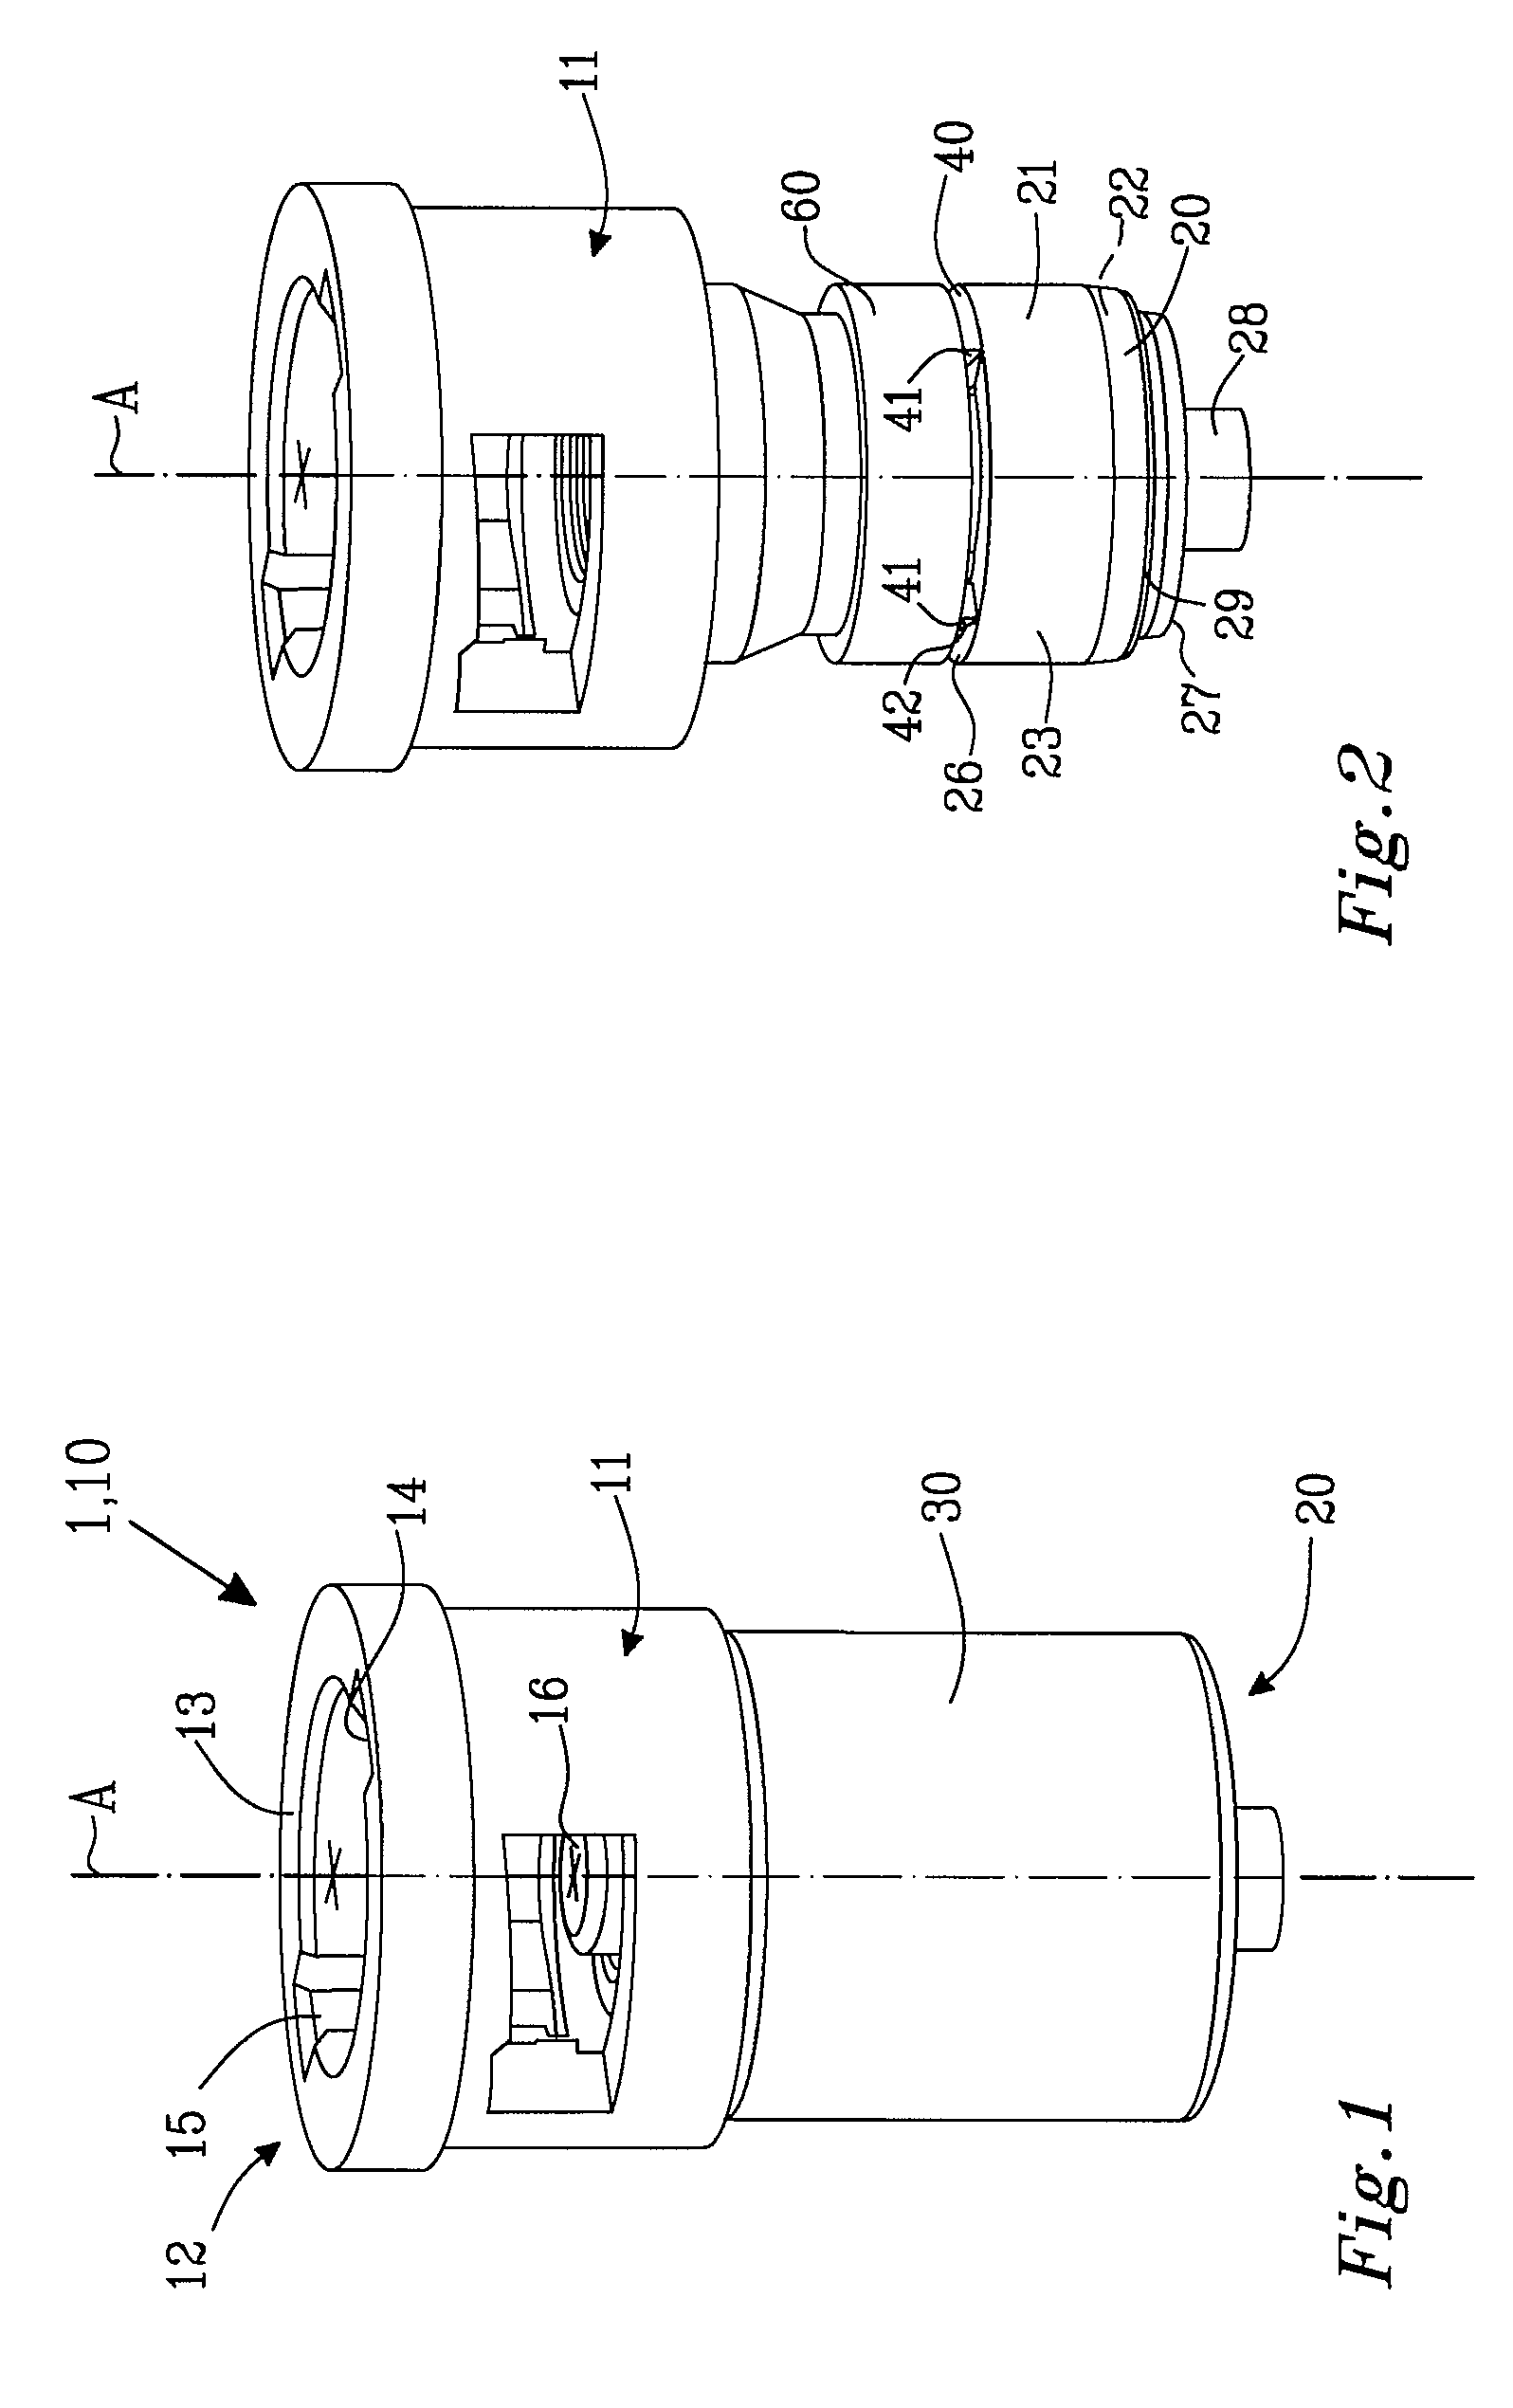 Connection arrangement and method for connecting a medical device to the improved connection arrangement